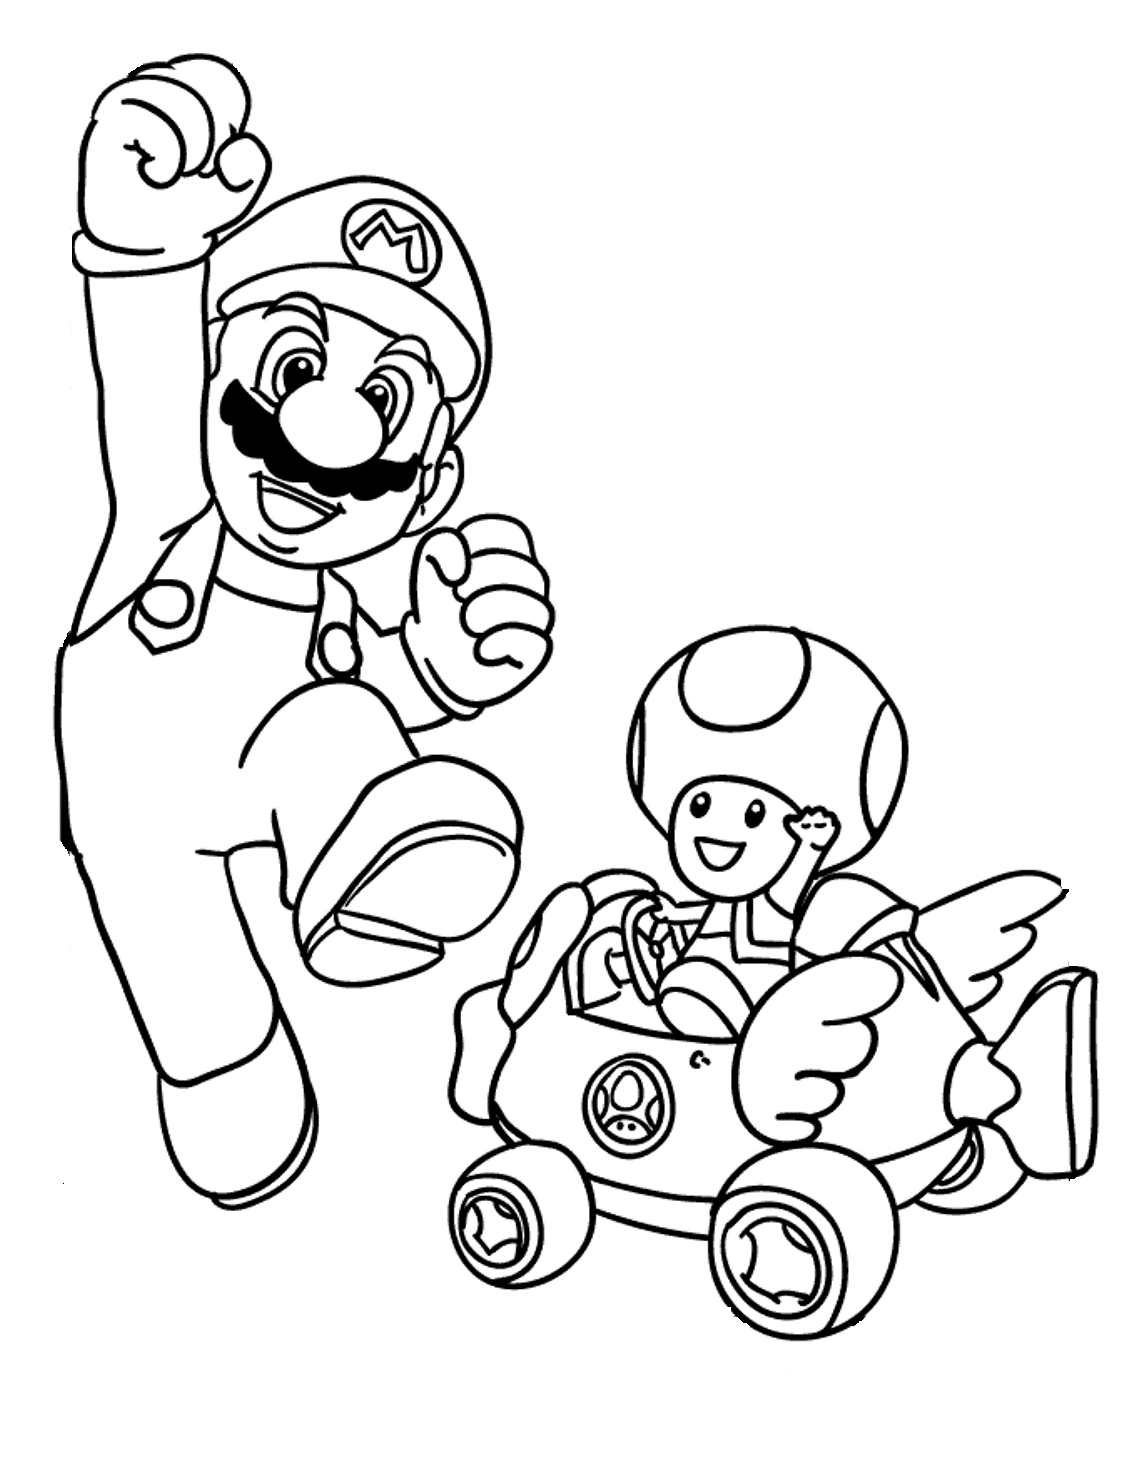 Mushroom And Mario Bros Coloring Pages | Cartoon Coloring Pages Of